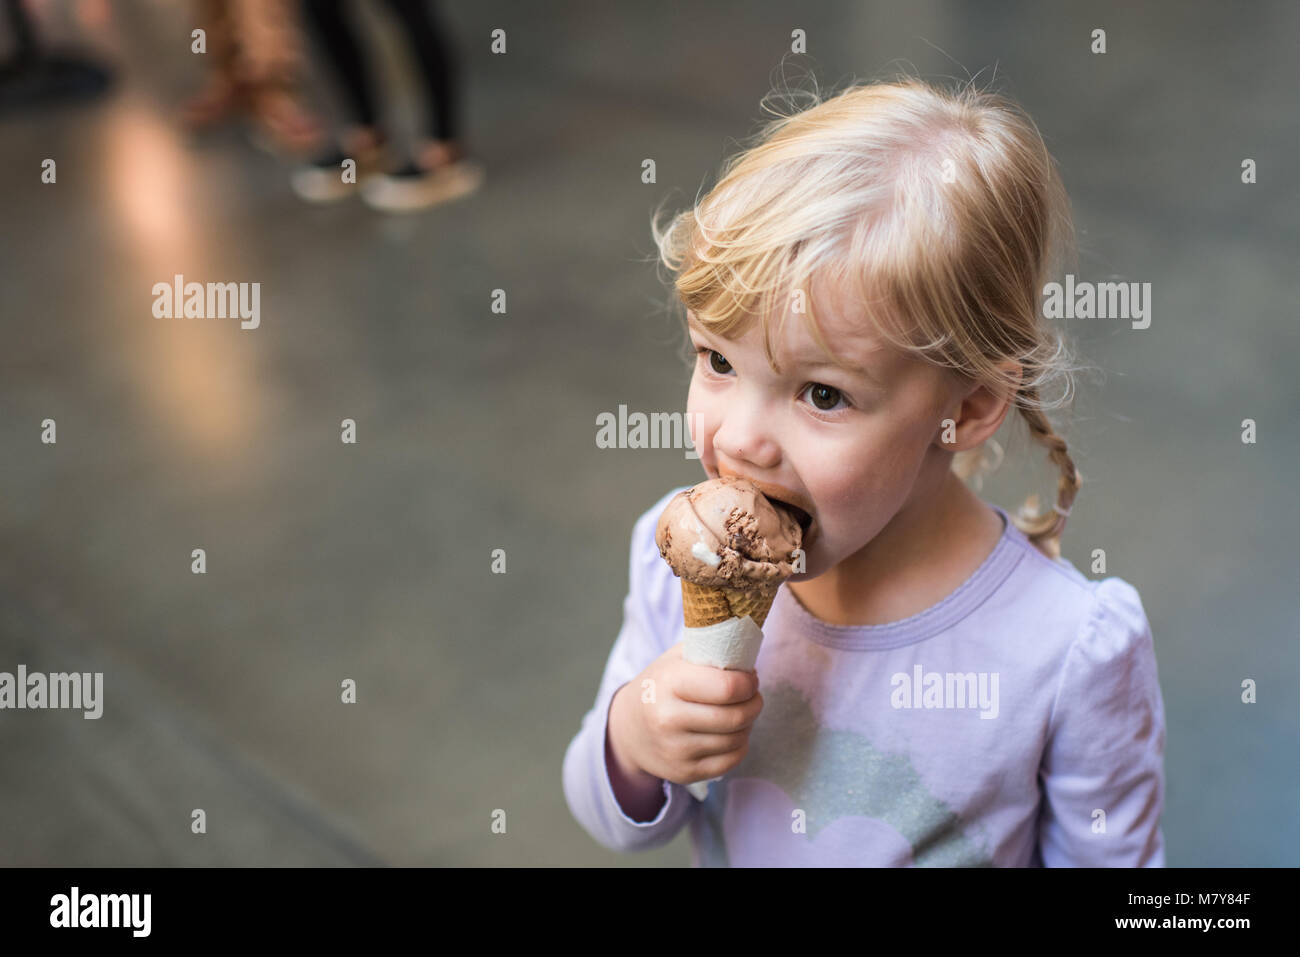 child eating ice cream cone in marketplace Stock Photo